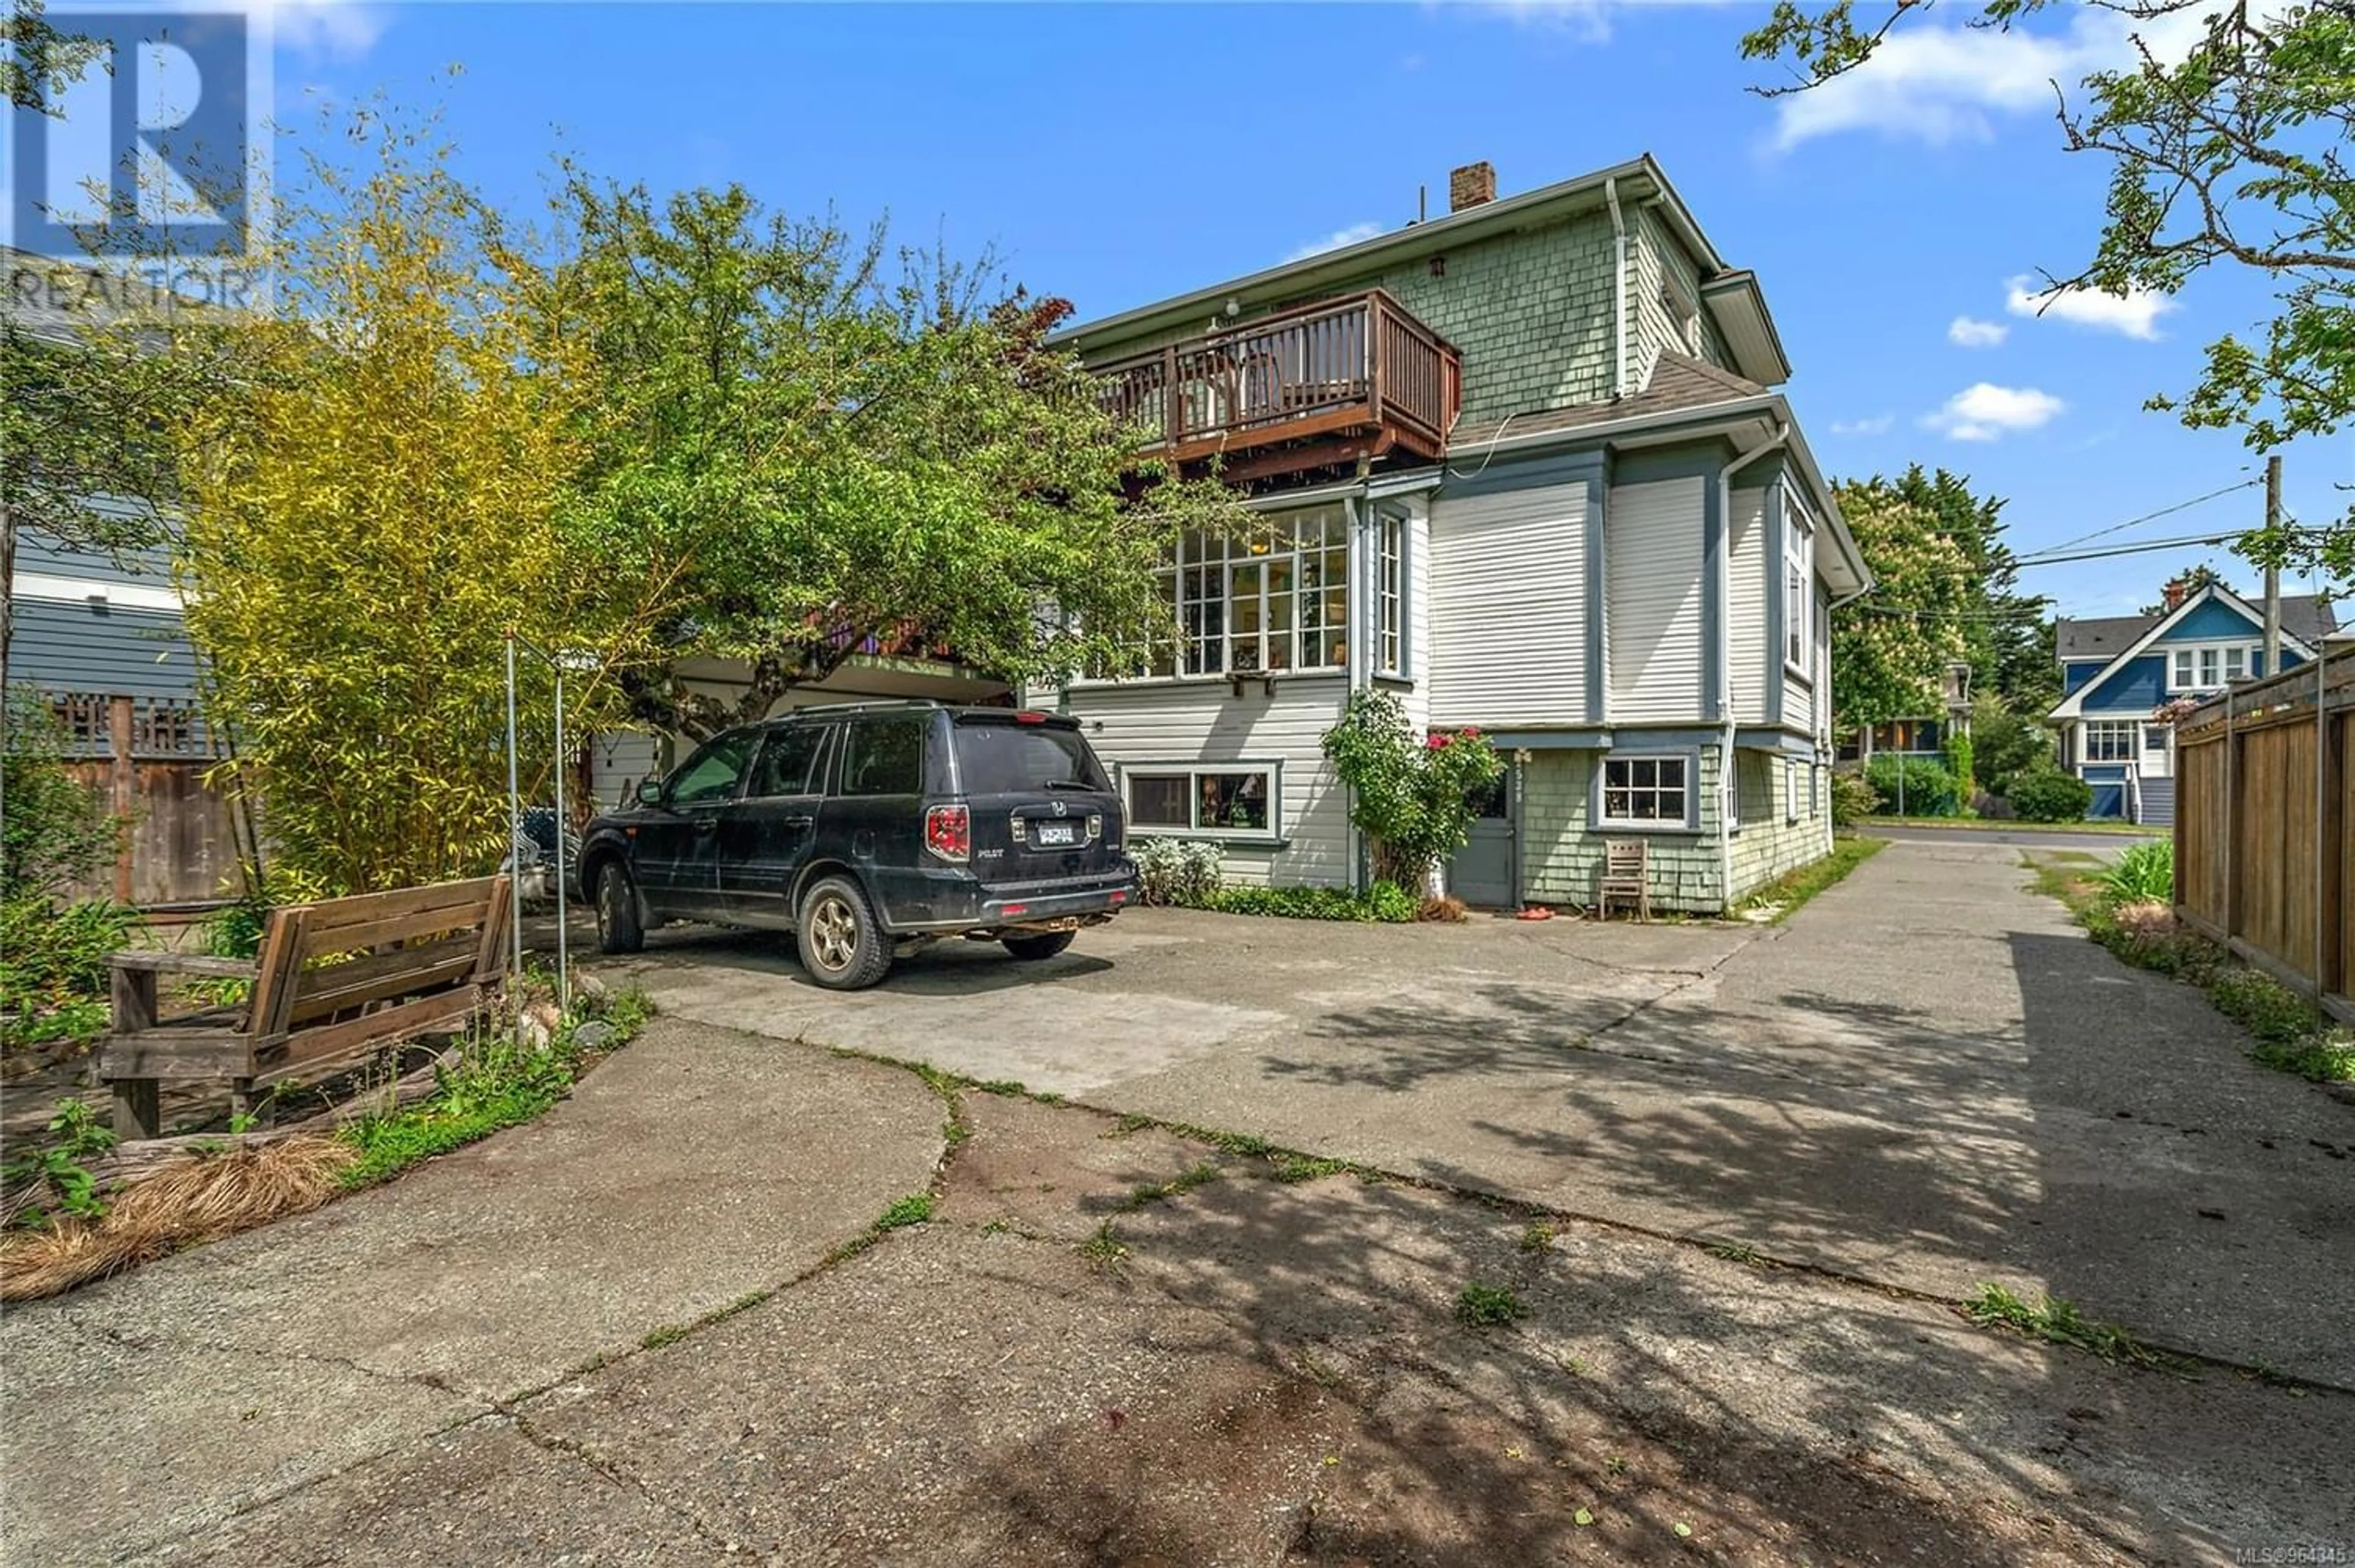 Outside view for 2538 Fernwood Rd, Victoria British Columbia V8T2Z9